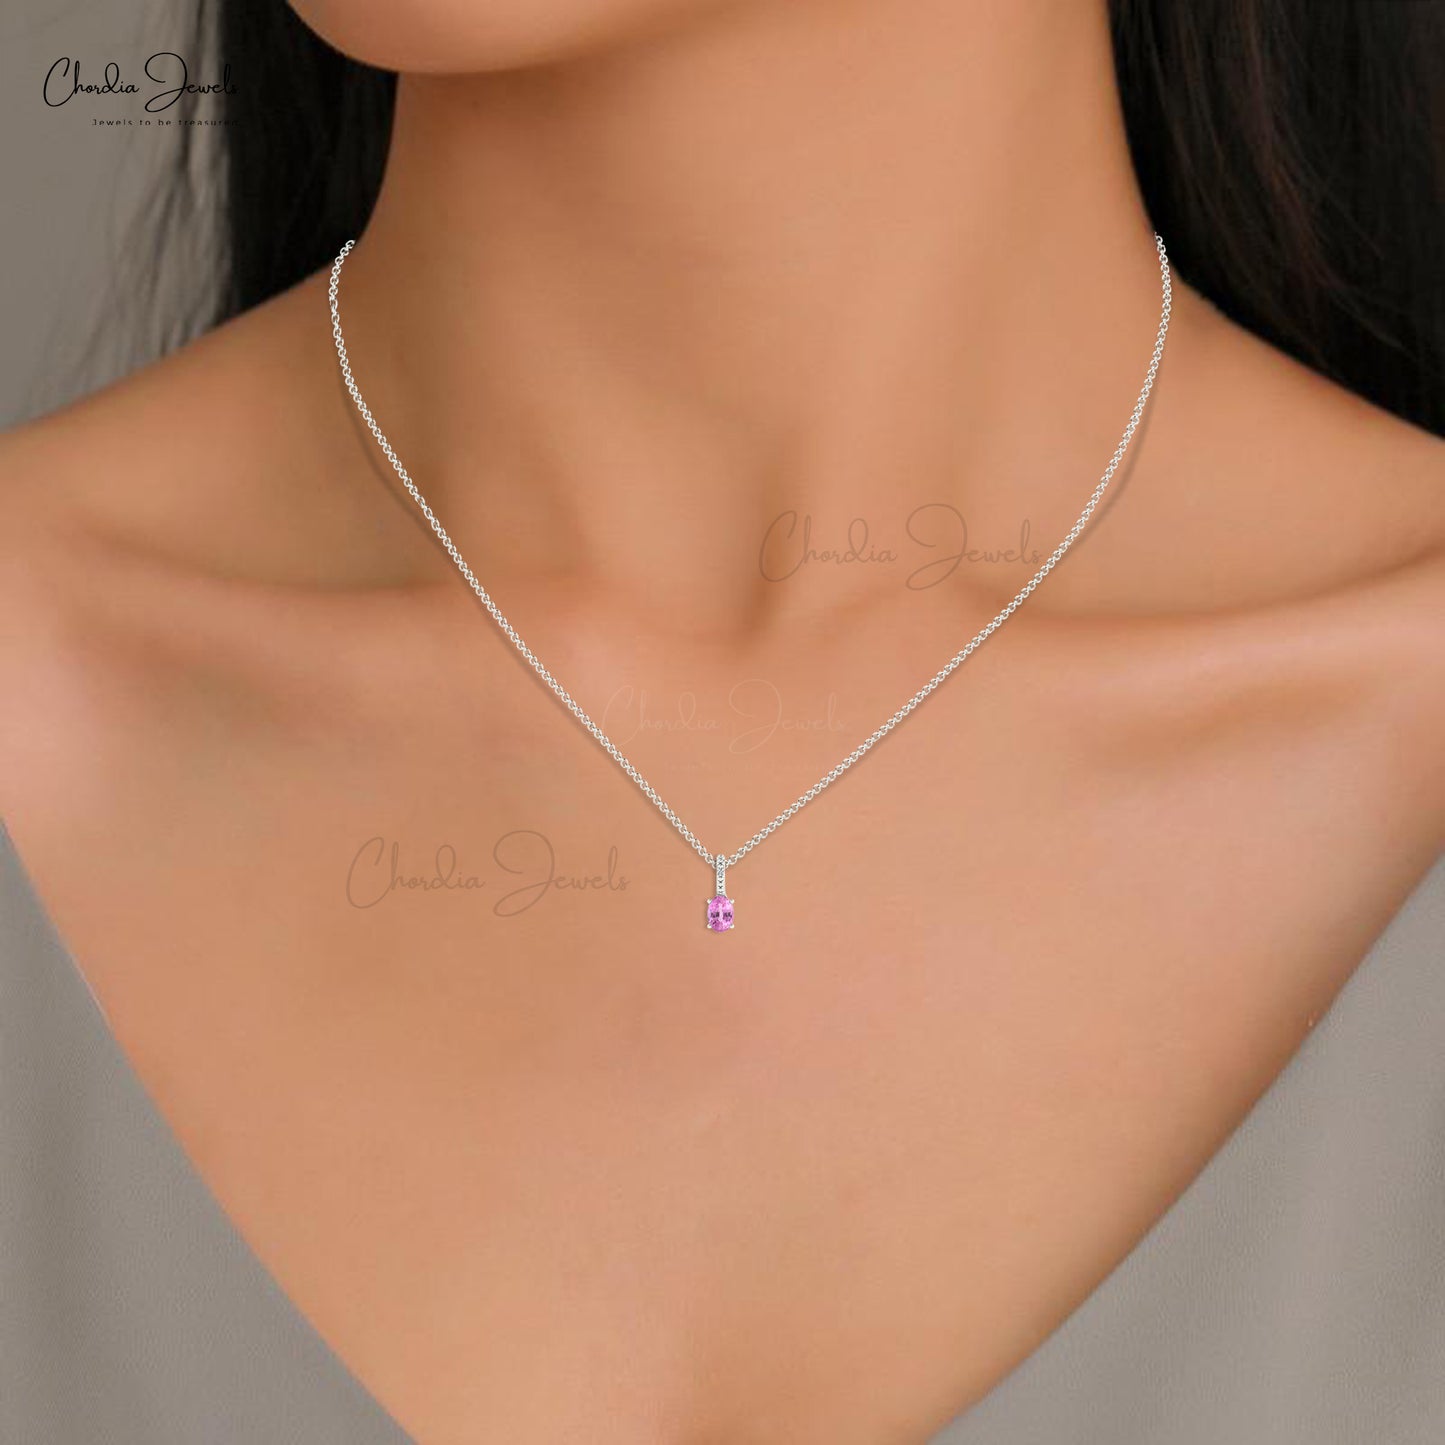 Load image into Gallery viewer, Hot Sale Cute Design 14k Real Gold Hidden Bail Pendant Natural White Diamond and Pink Sapphire Gemstone Pendant Necklace Wedding Gift
